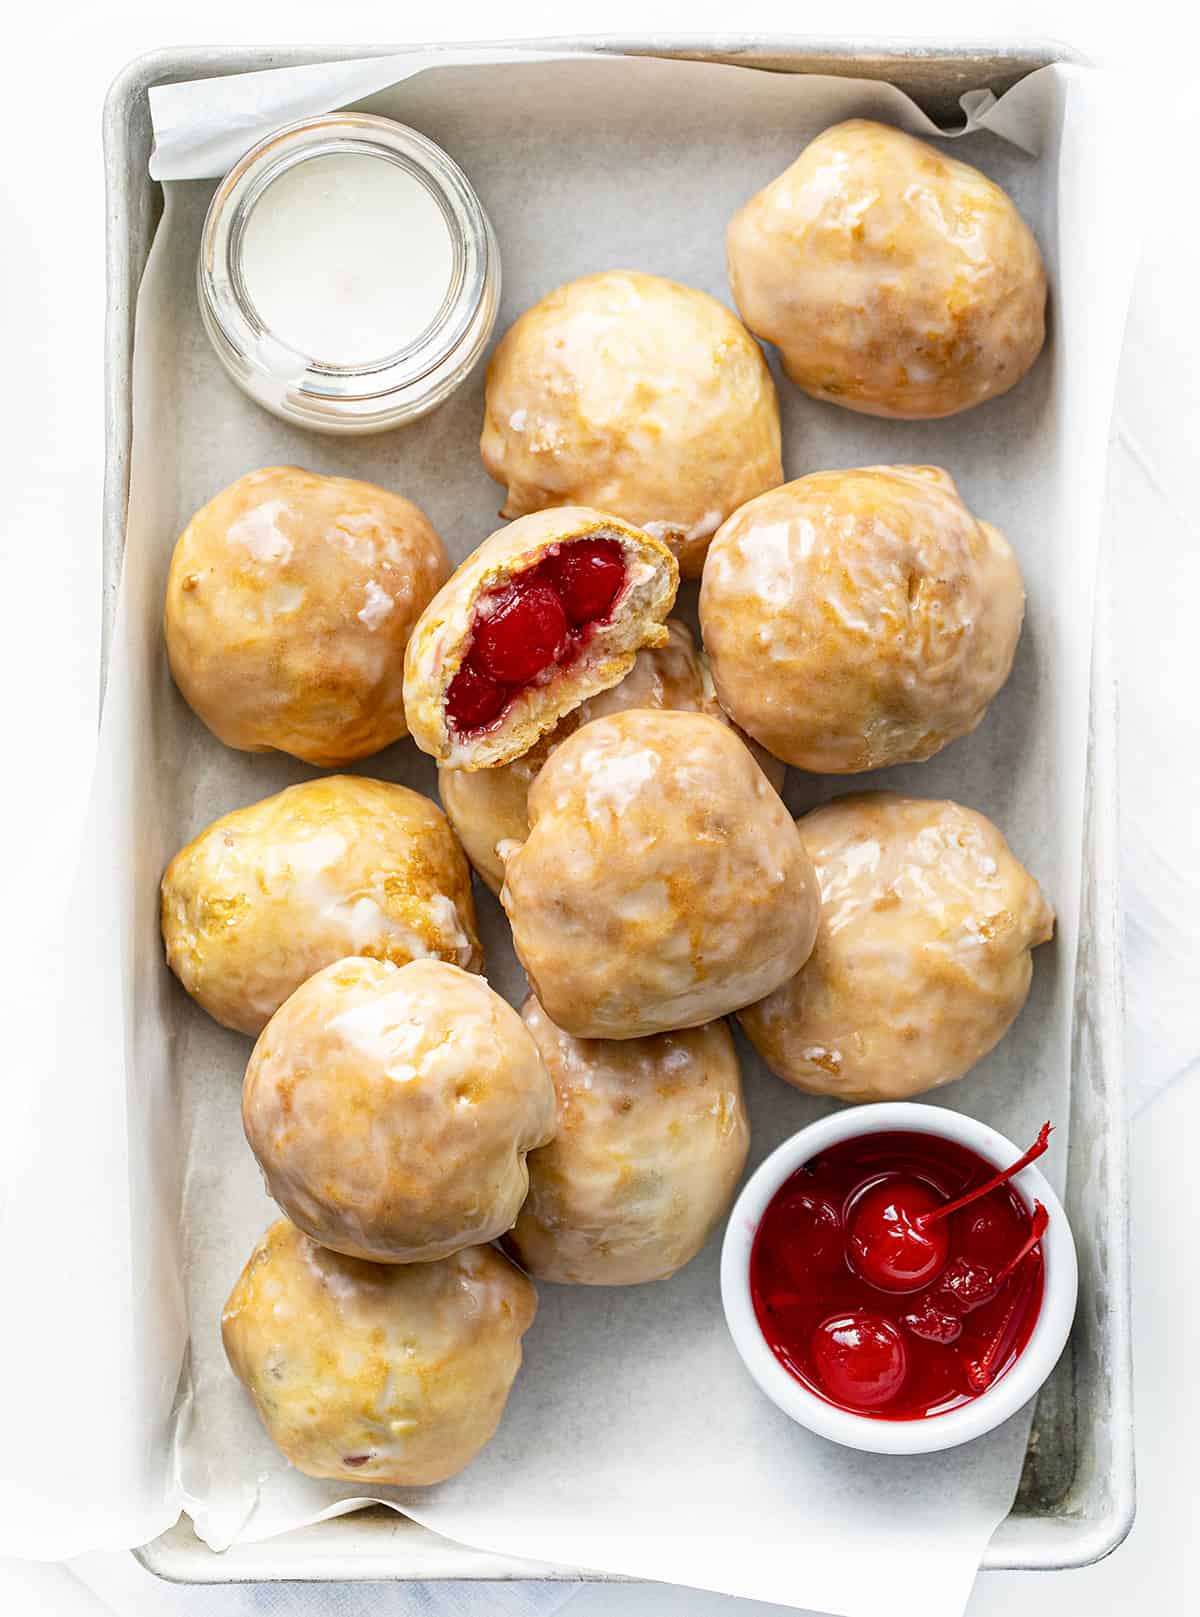 Cherry Pie Bombs in a Pan with Parchment, Glaze, and Cherries as well as one Cherry bomb cut in Half